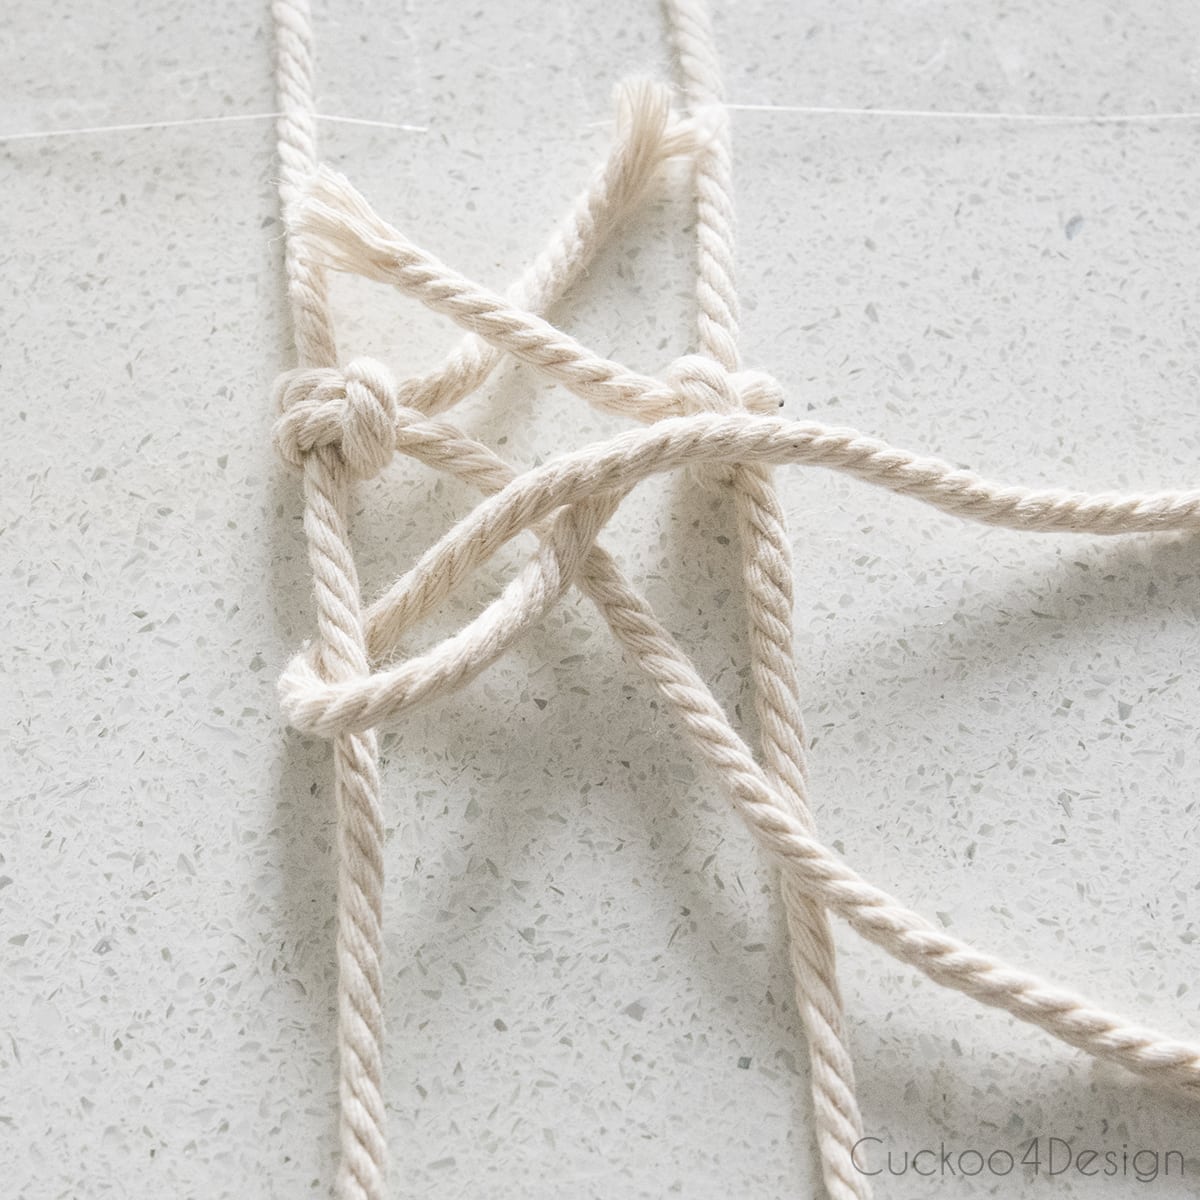 starting a double half hitch knots